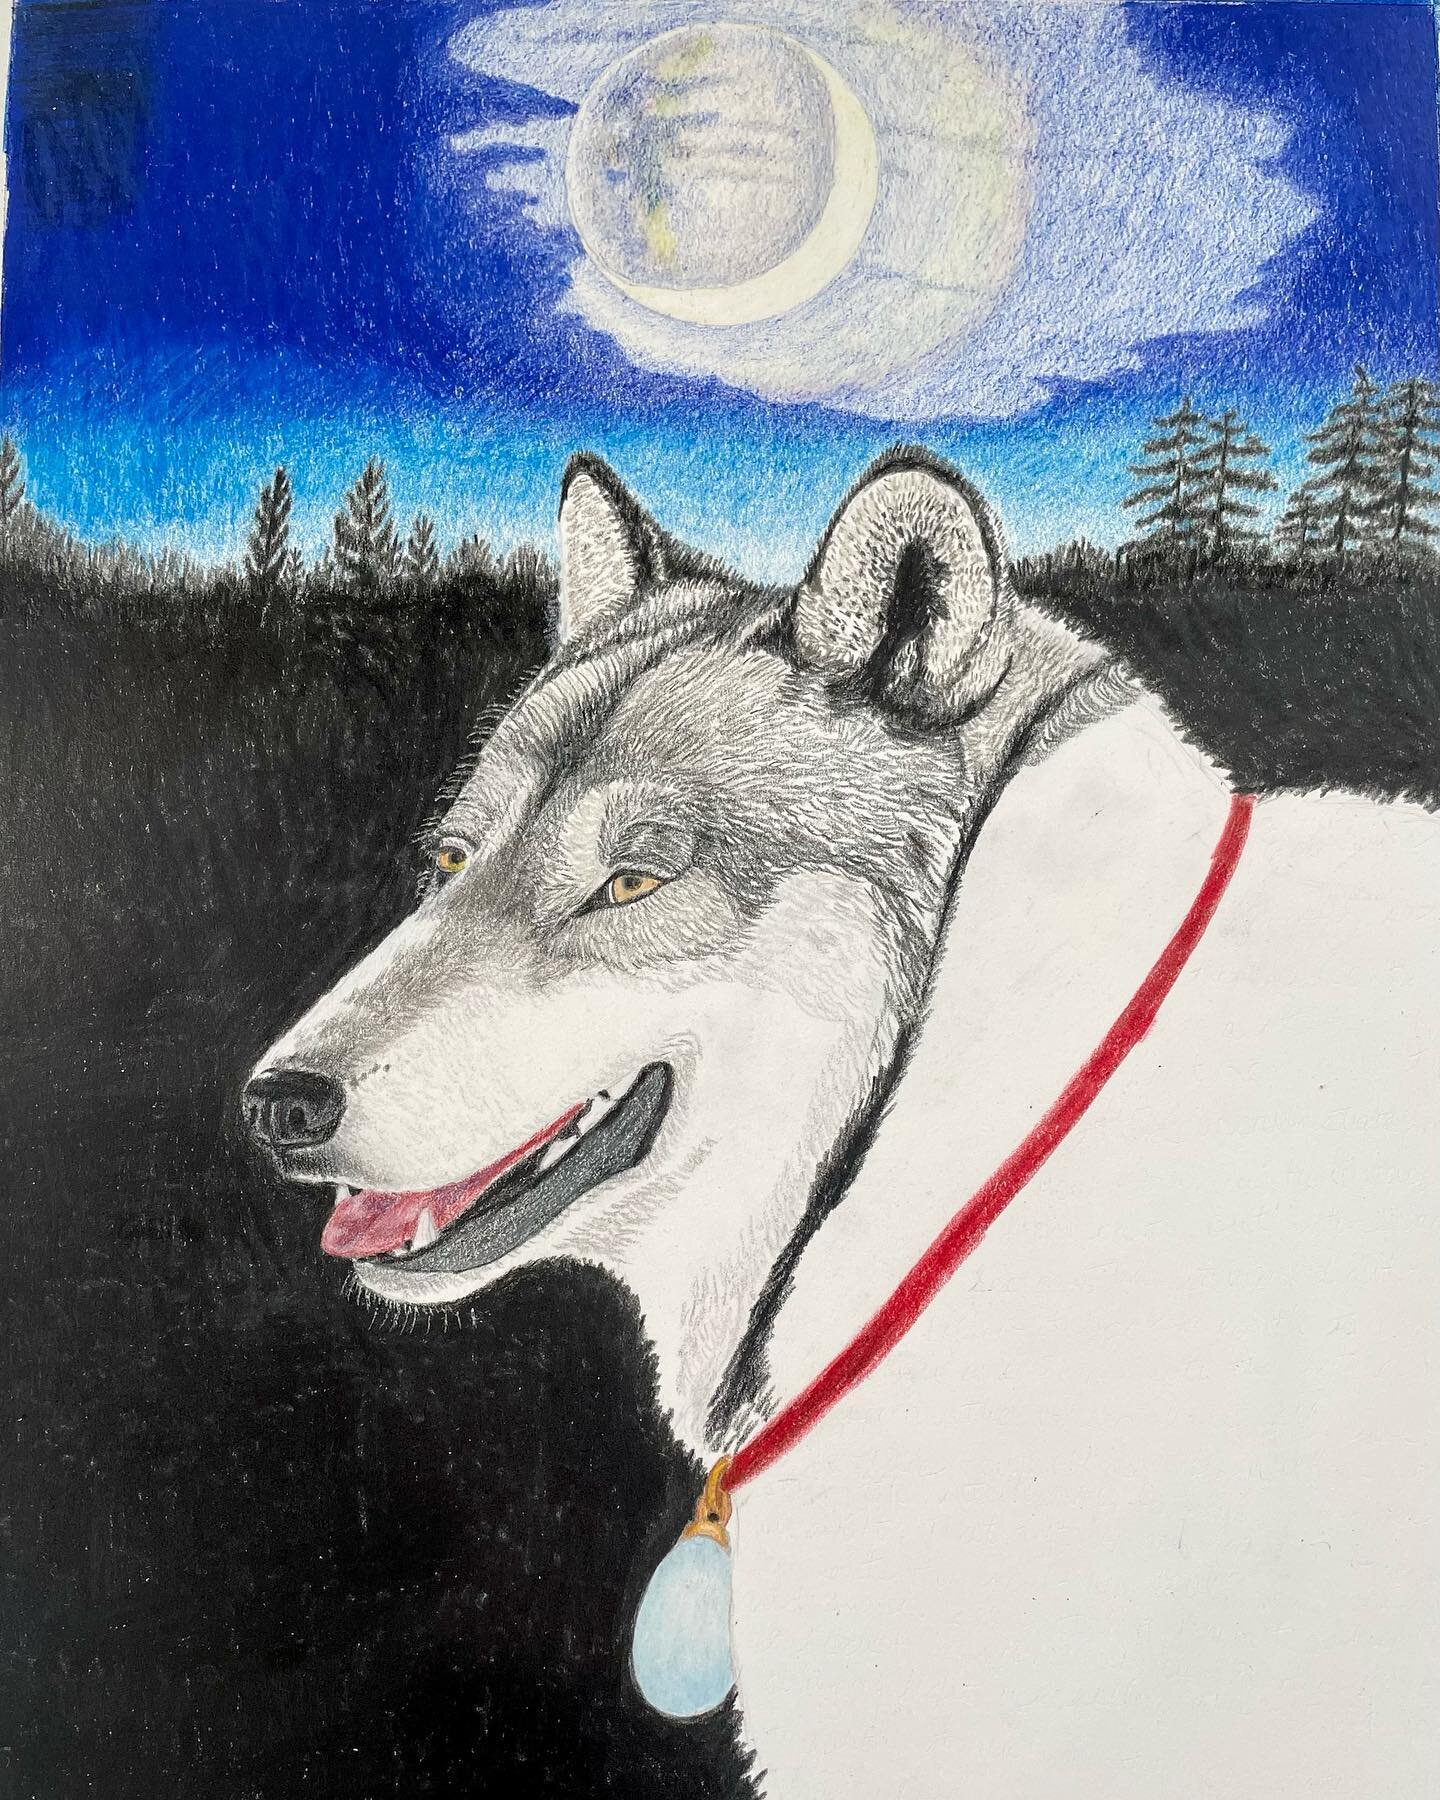 &ldquo;The Gift&rdquo;, colored pencil, 12&rdquo;W x14.5&rdquo;H.
This piece represents the essence of who I am, the wolf, giving a gift to myself-that being, an egg.  The egg represents new beginnings and hope. This work is in progress currently. #w